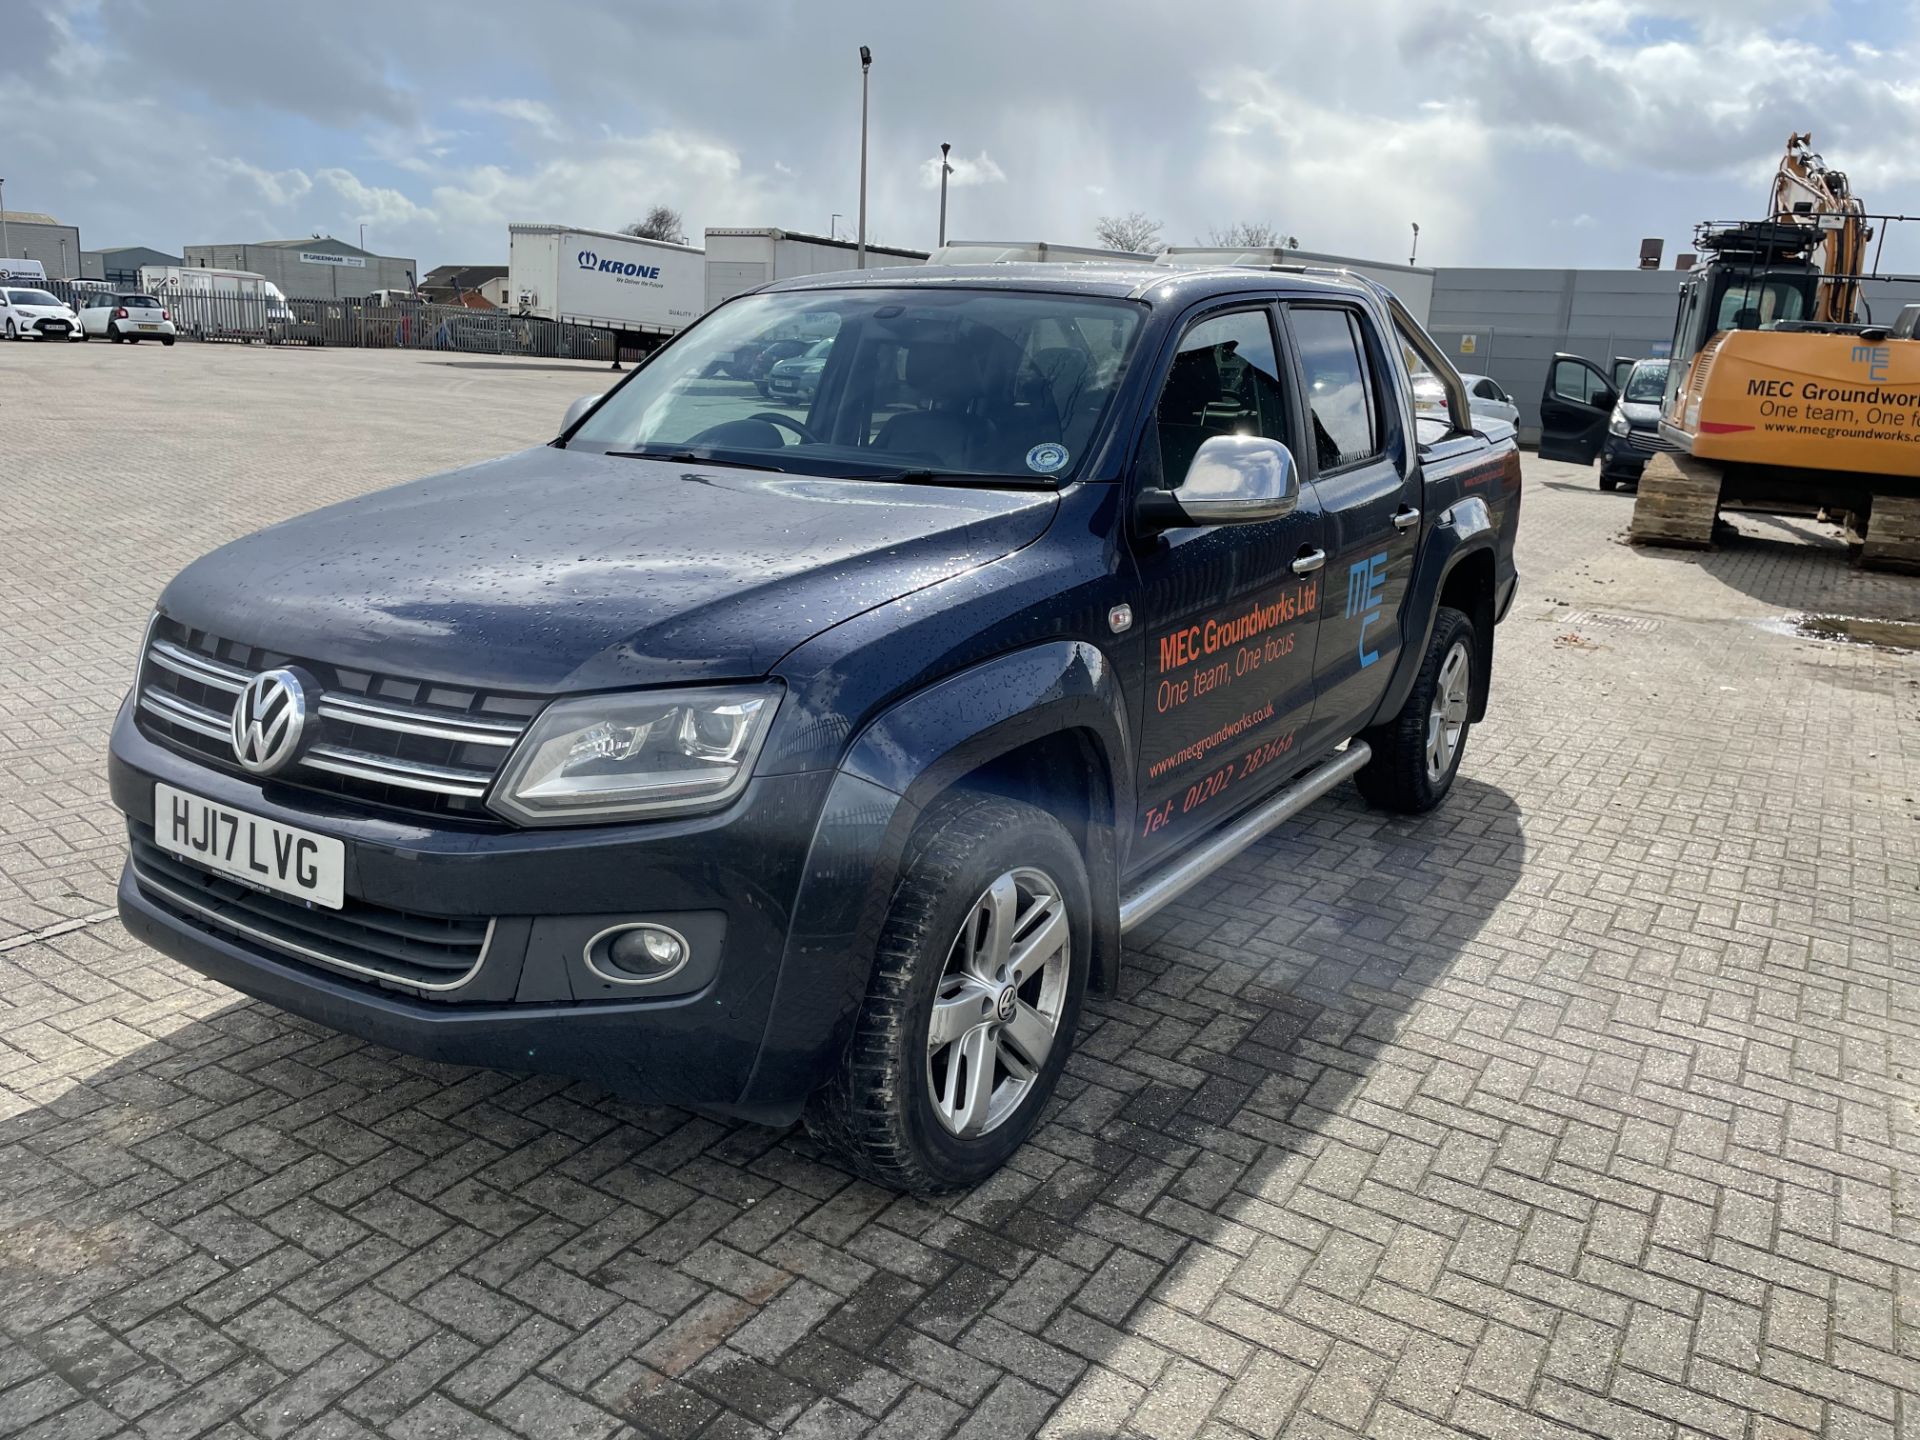 Volkswagen Amarok A32 Diesel Highline 2.0 BiTDI 180MT 4 Motion Double cab Pickup in Blue with - Image 2 of 8